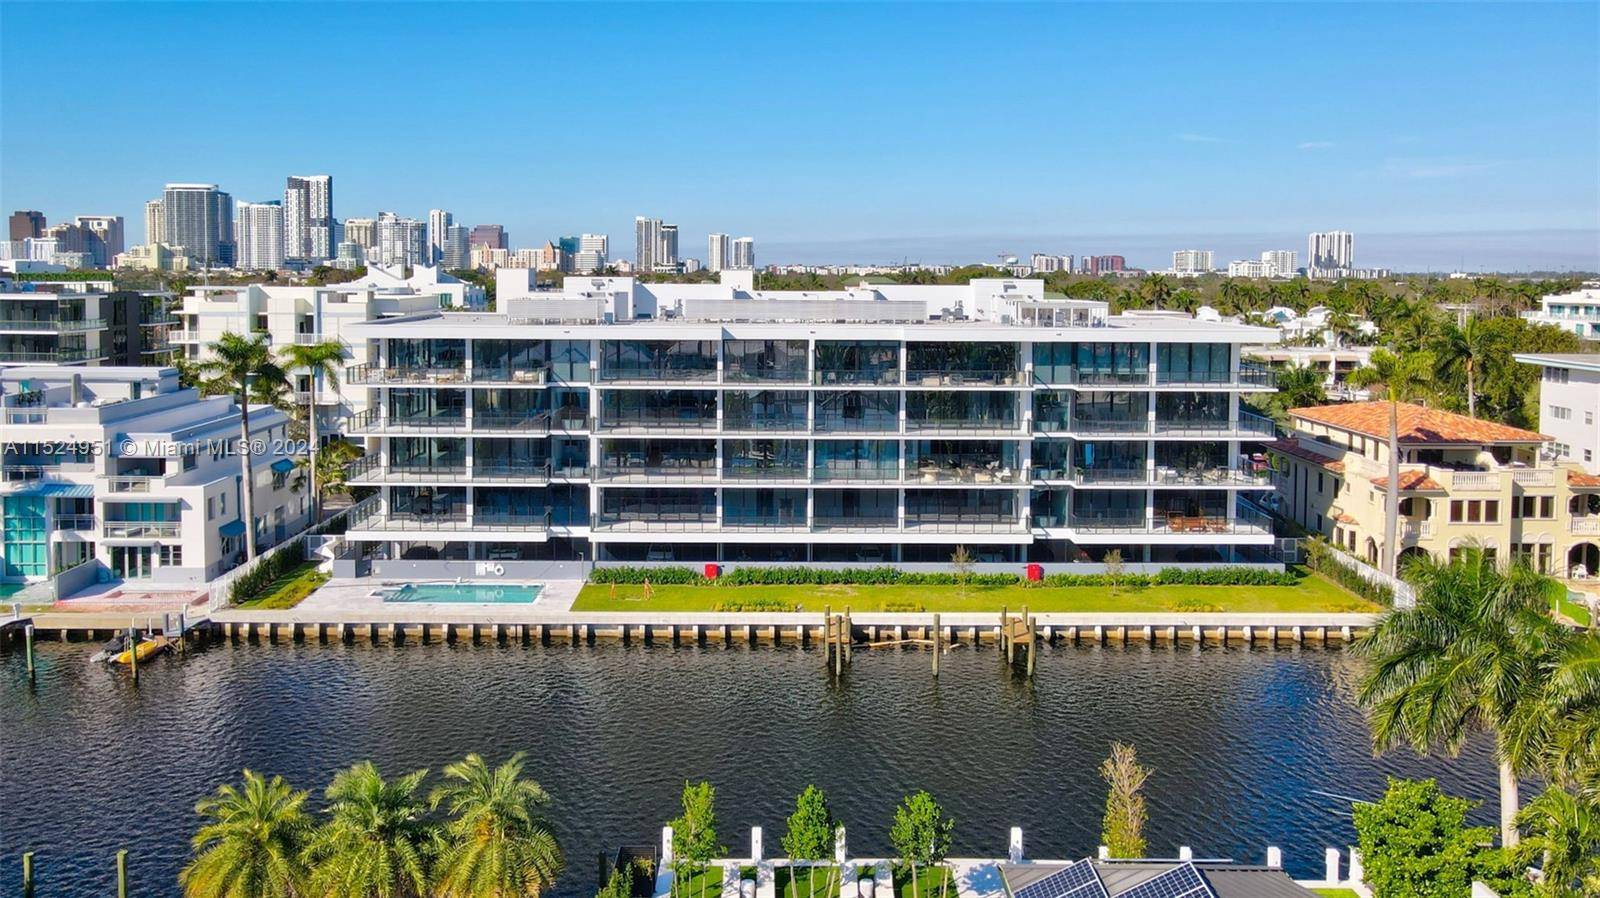 Move In Ready New Construction Ultra Luxurious Waterfront Condo off Las Olas Blvd on Isle of Venice.